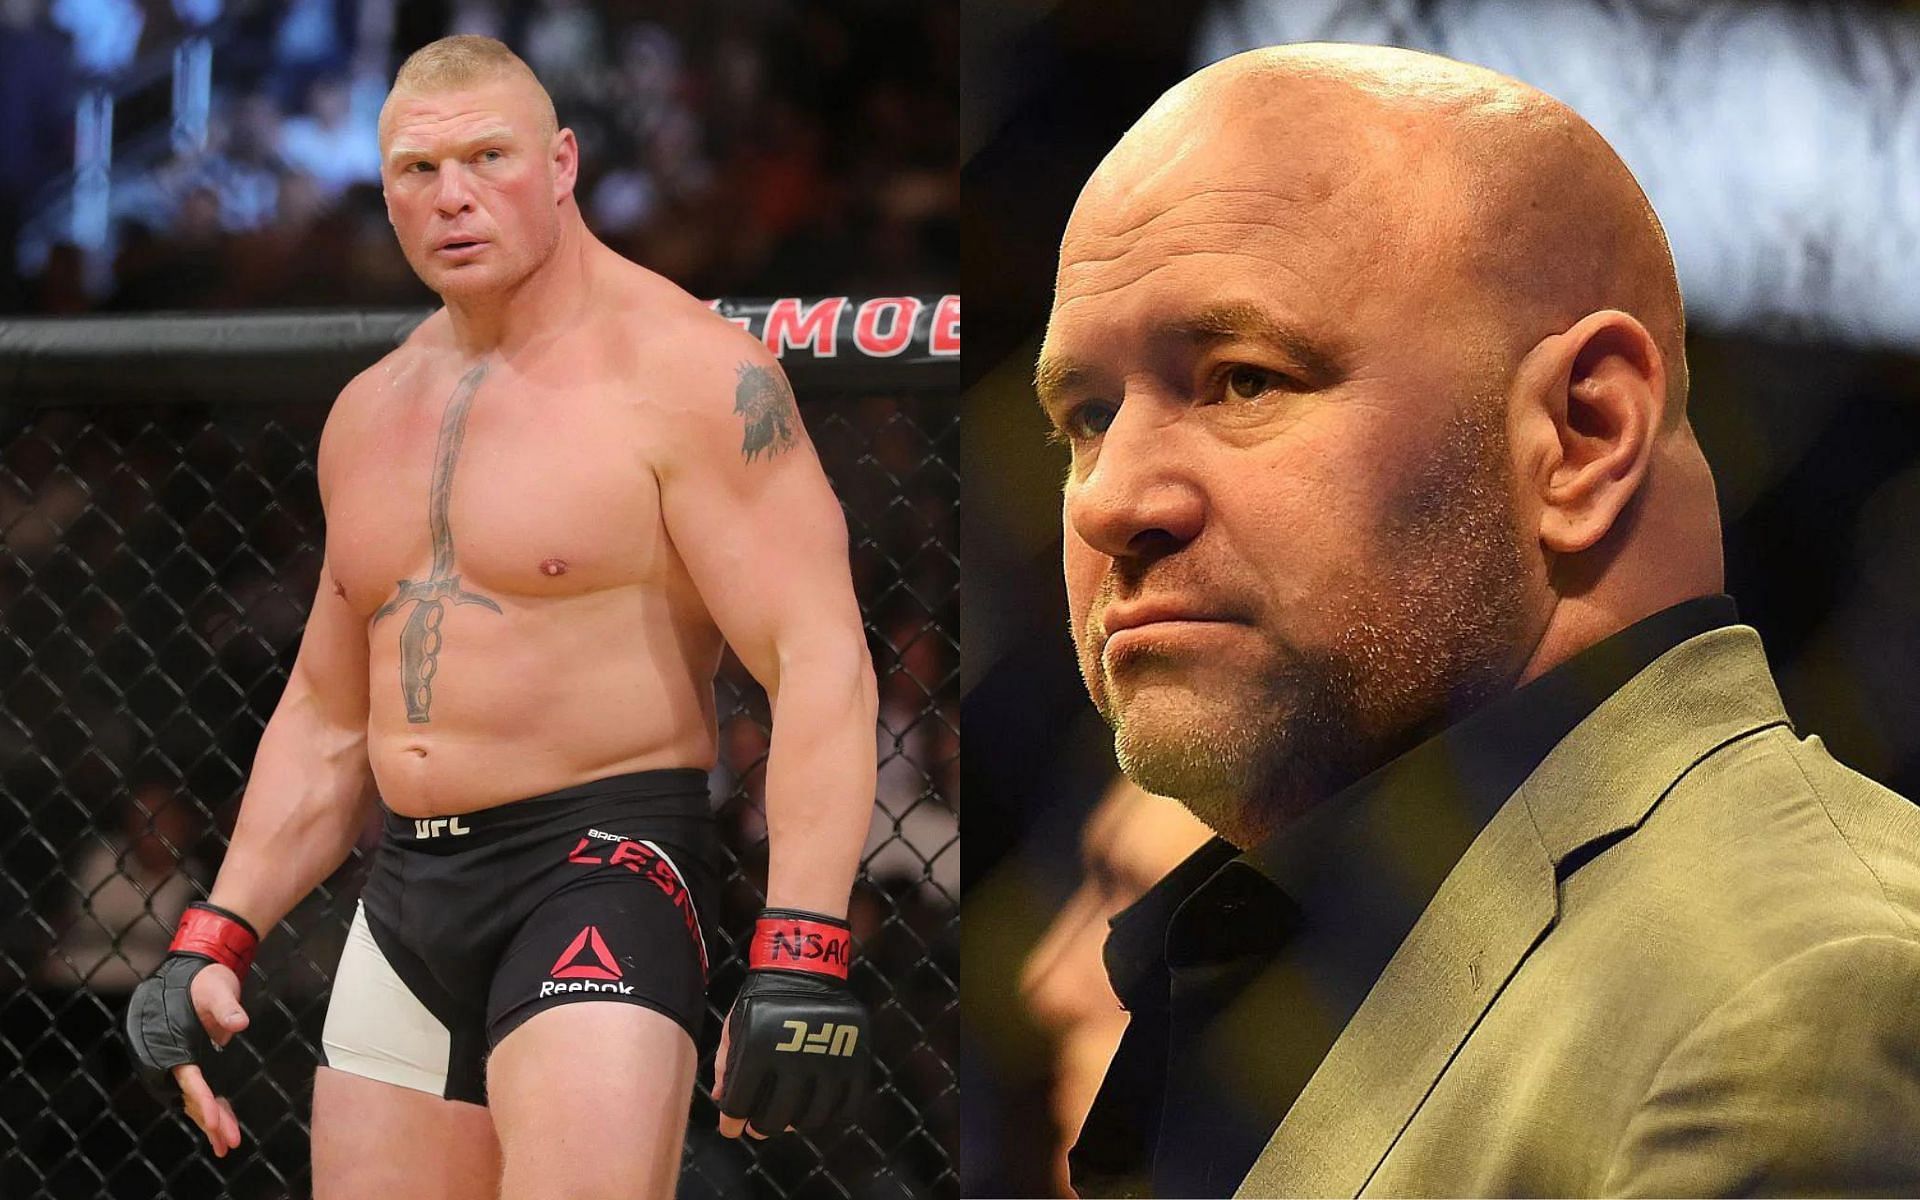 Brock Lesnar (Left) and Dana White (Right) (Images courtesy of Getty)